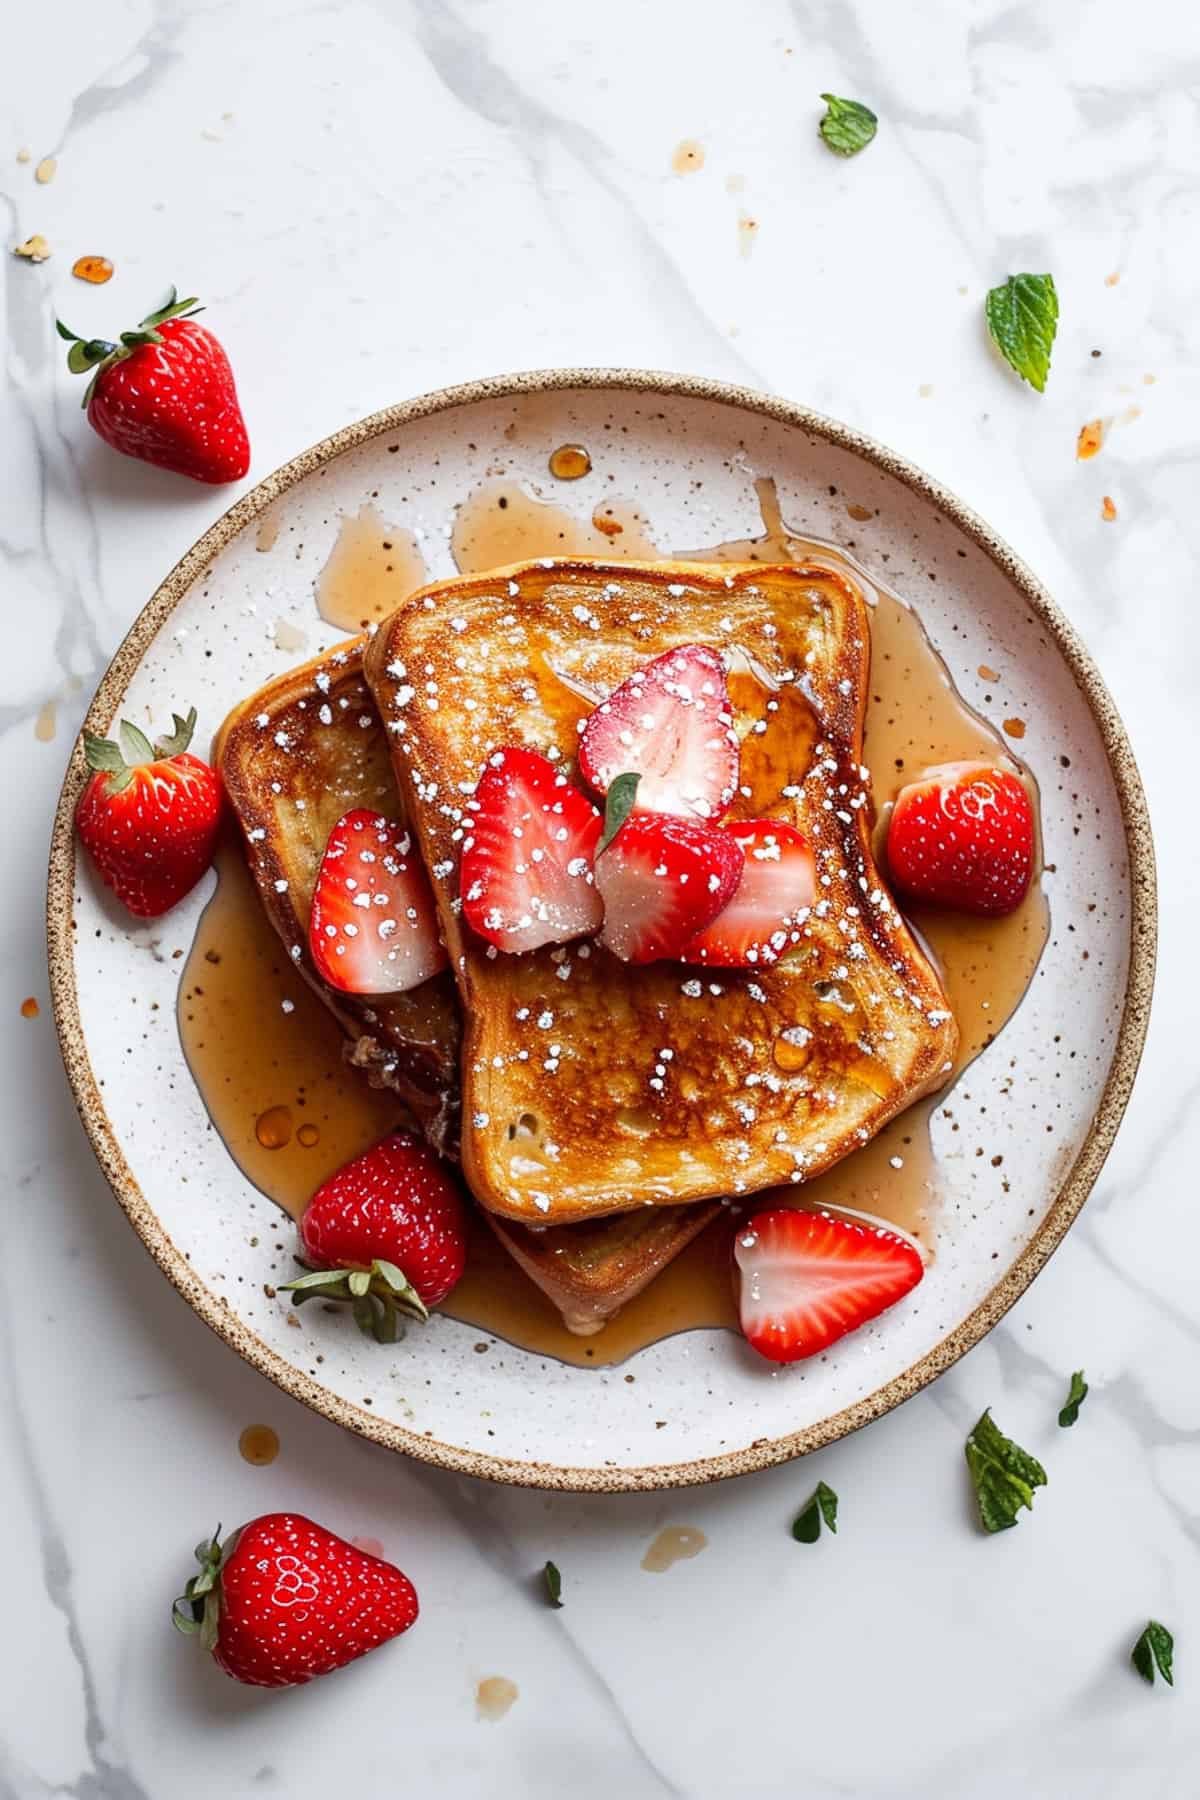 Eggy bread with maple syrup and strawberries on a white plate.